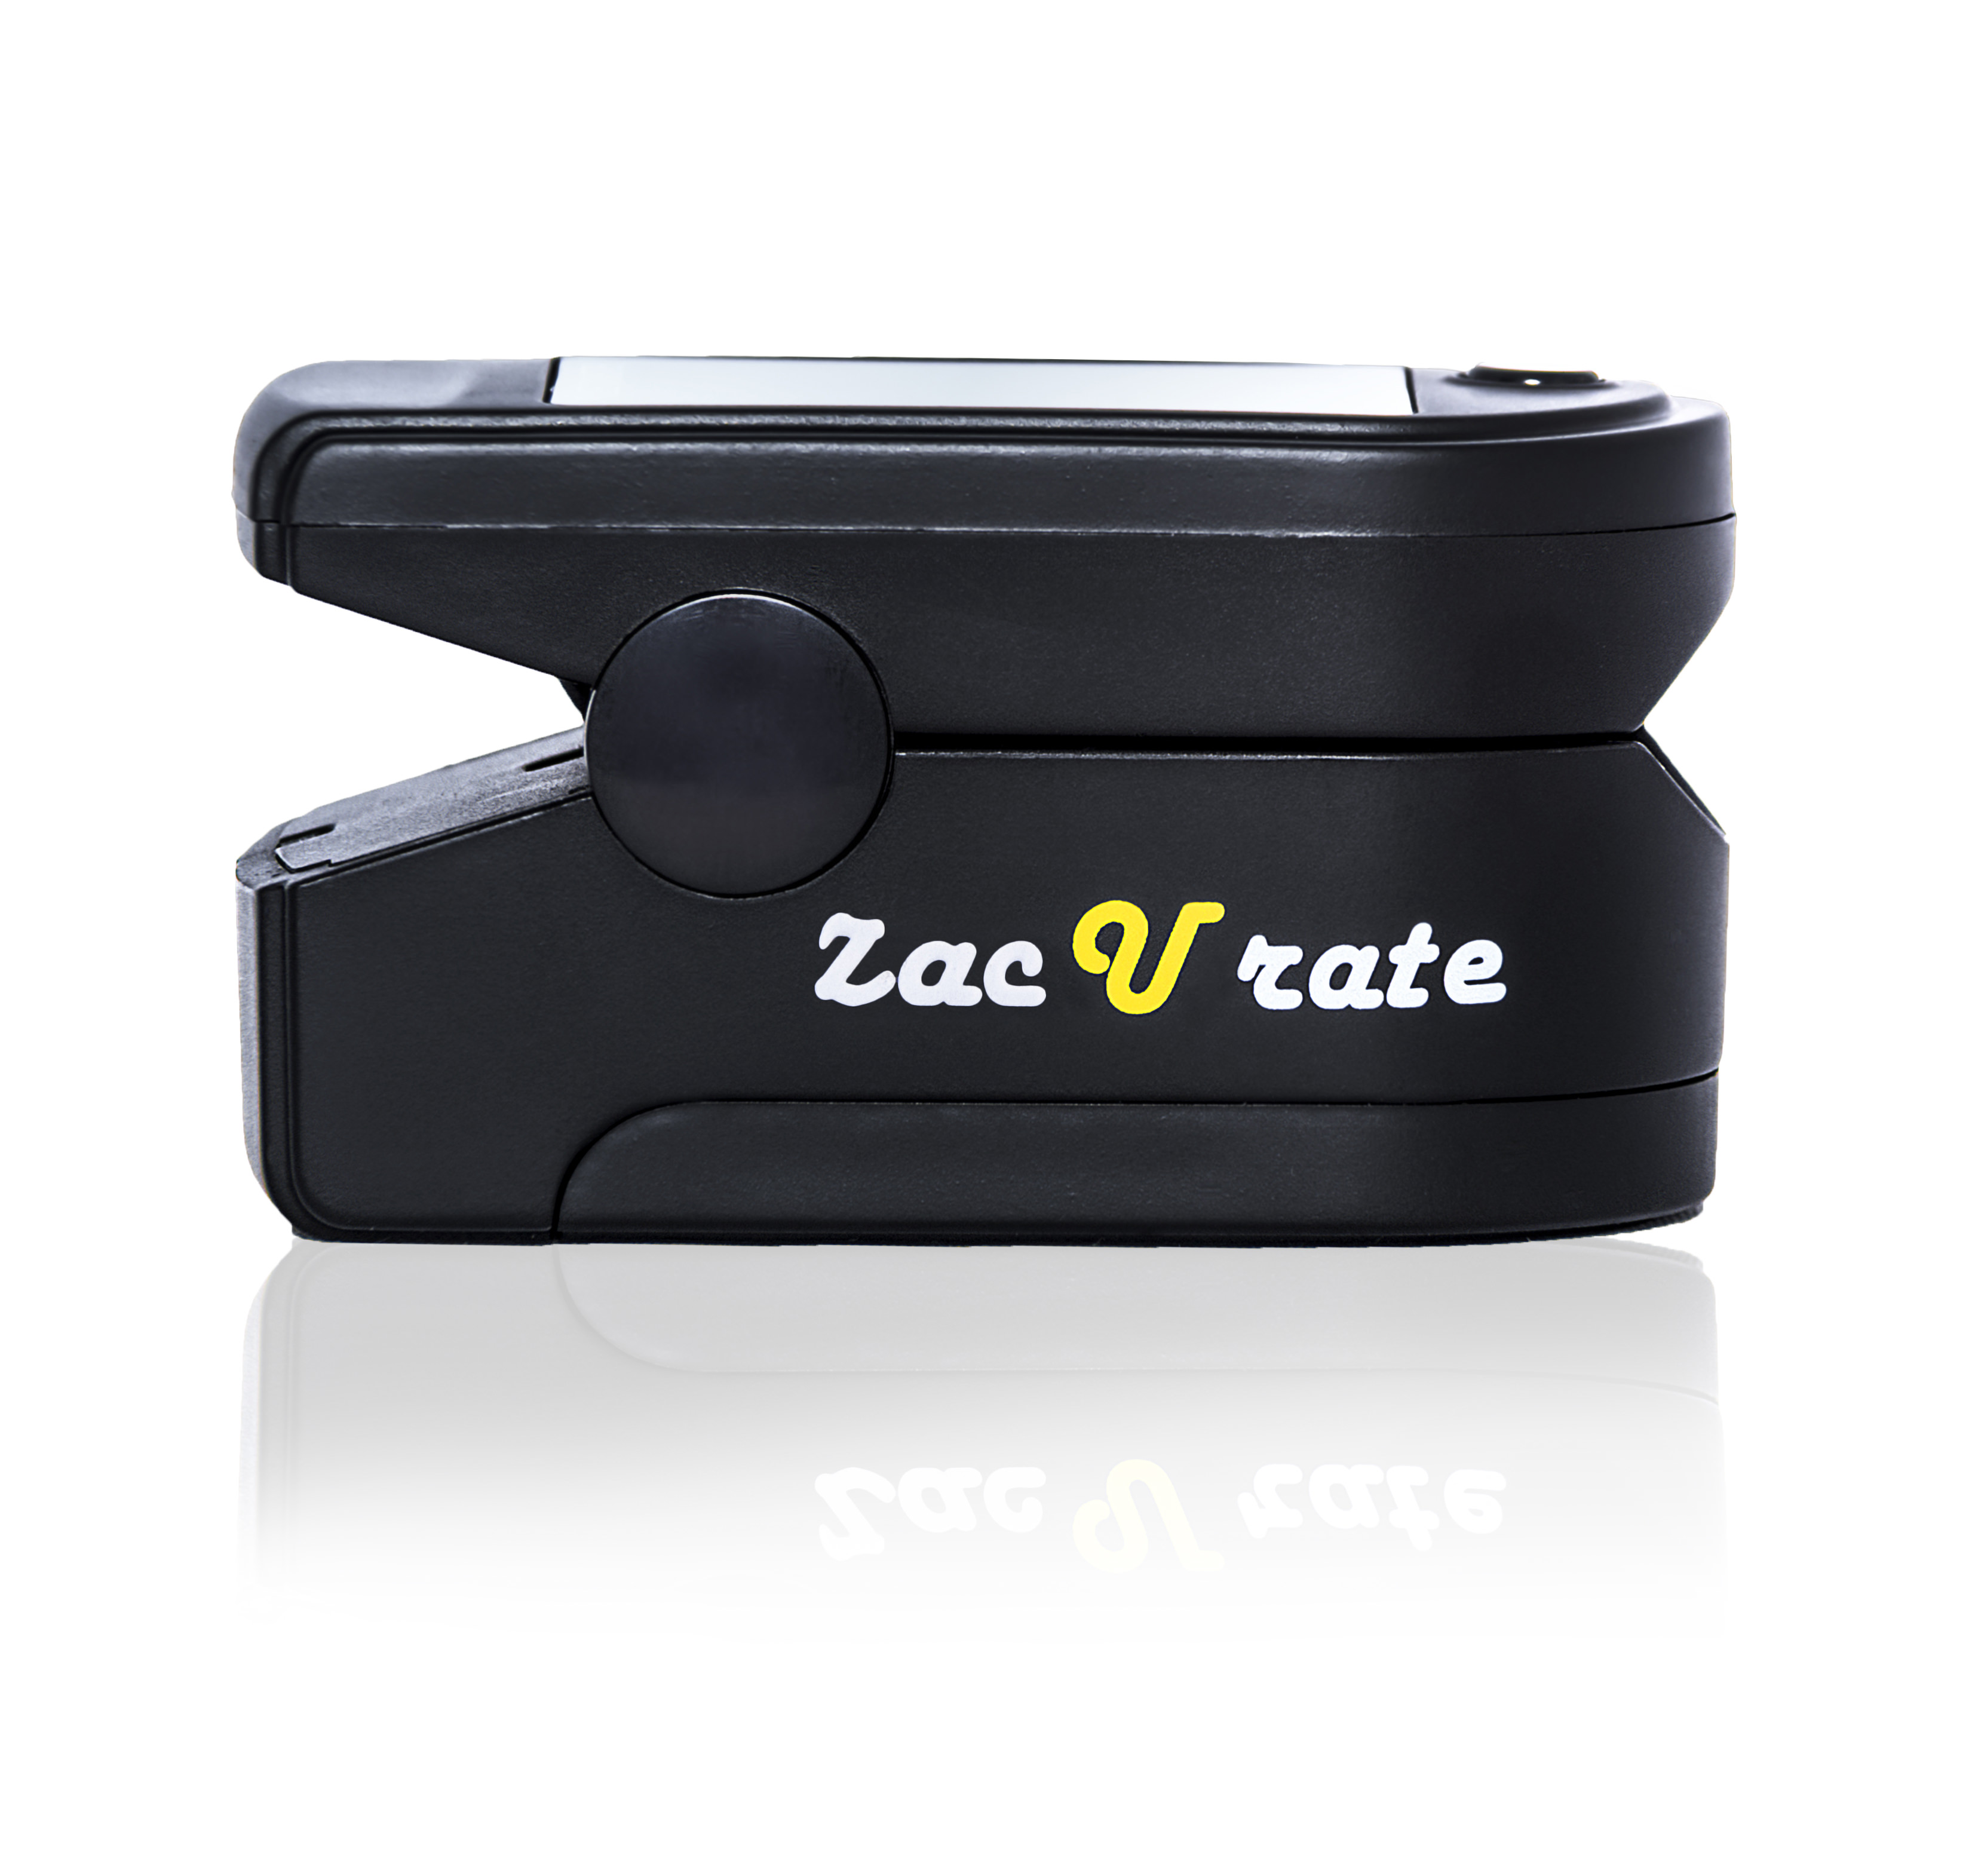 Zacurate Pro Series 500DL Sporting and Aviation Fingertip Pulse Oximeter Blood Oxygen Saturation Monitor (Royal Black) - image 3 of 7